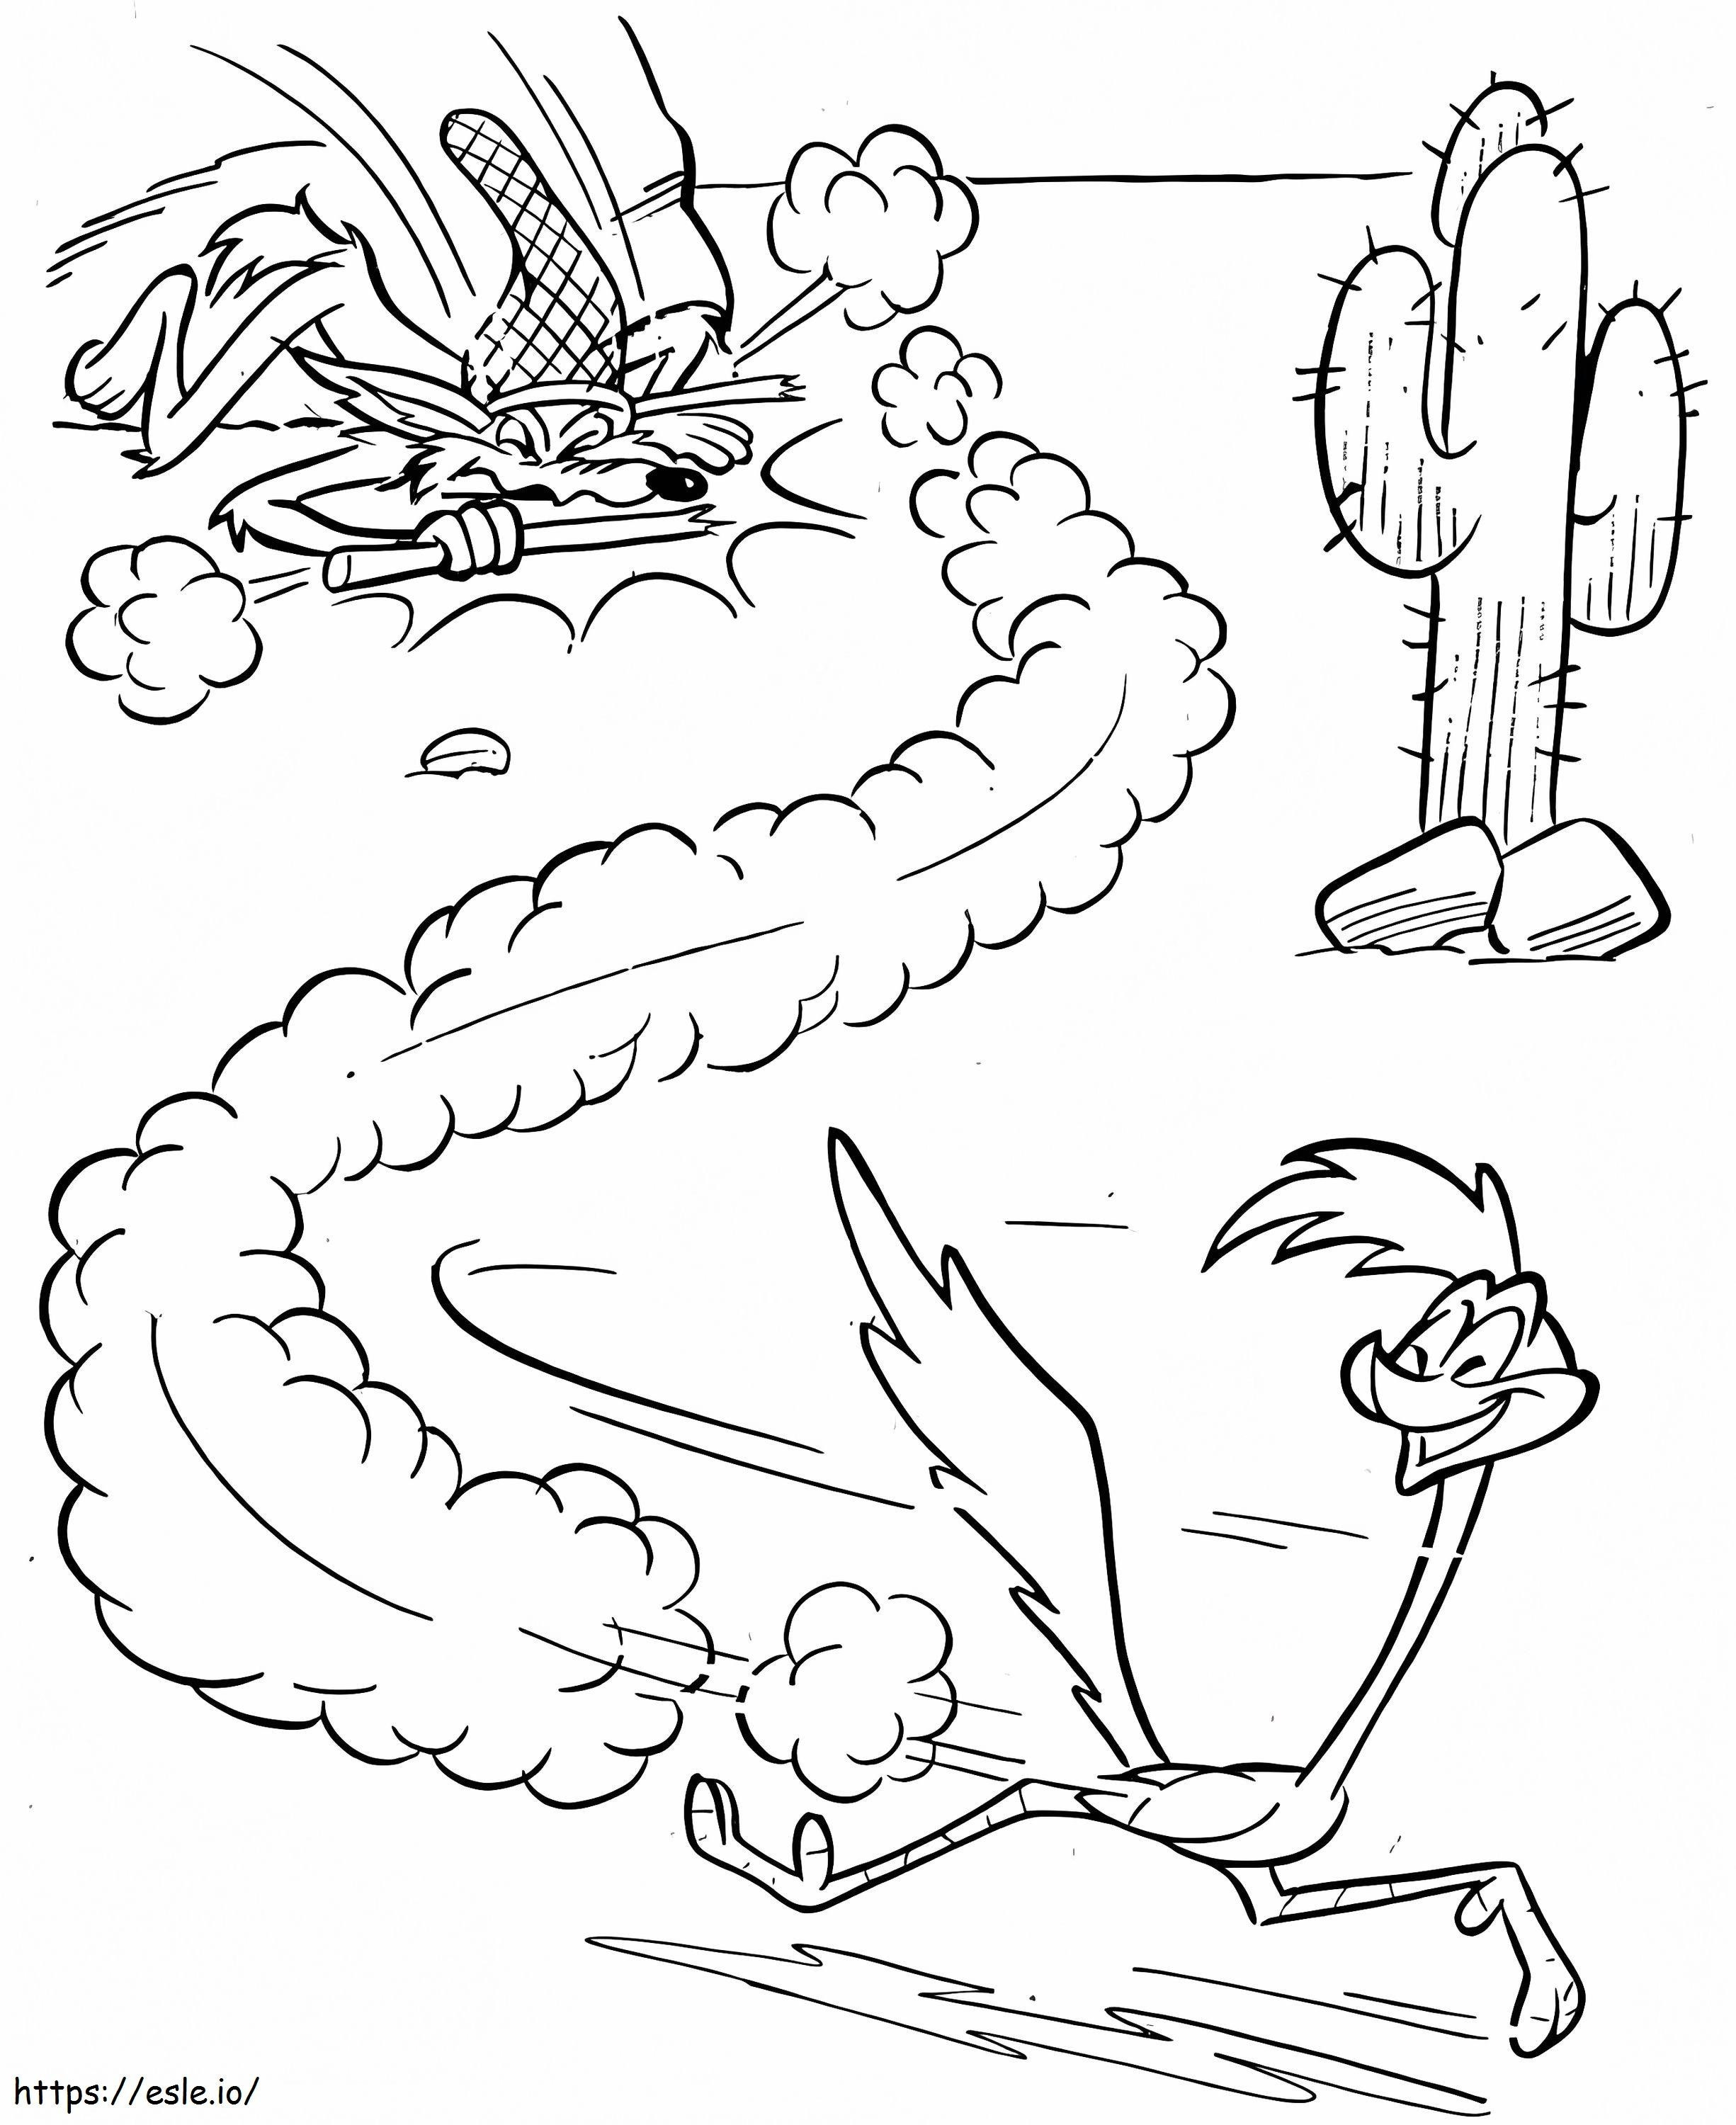 Wolf Chasing Road Runner coloring page